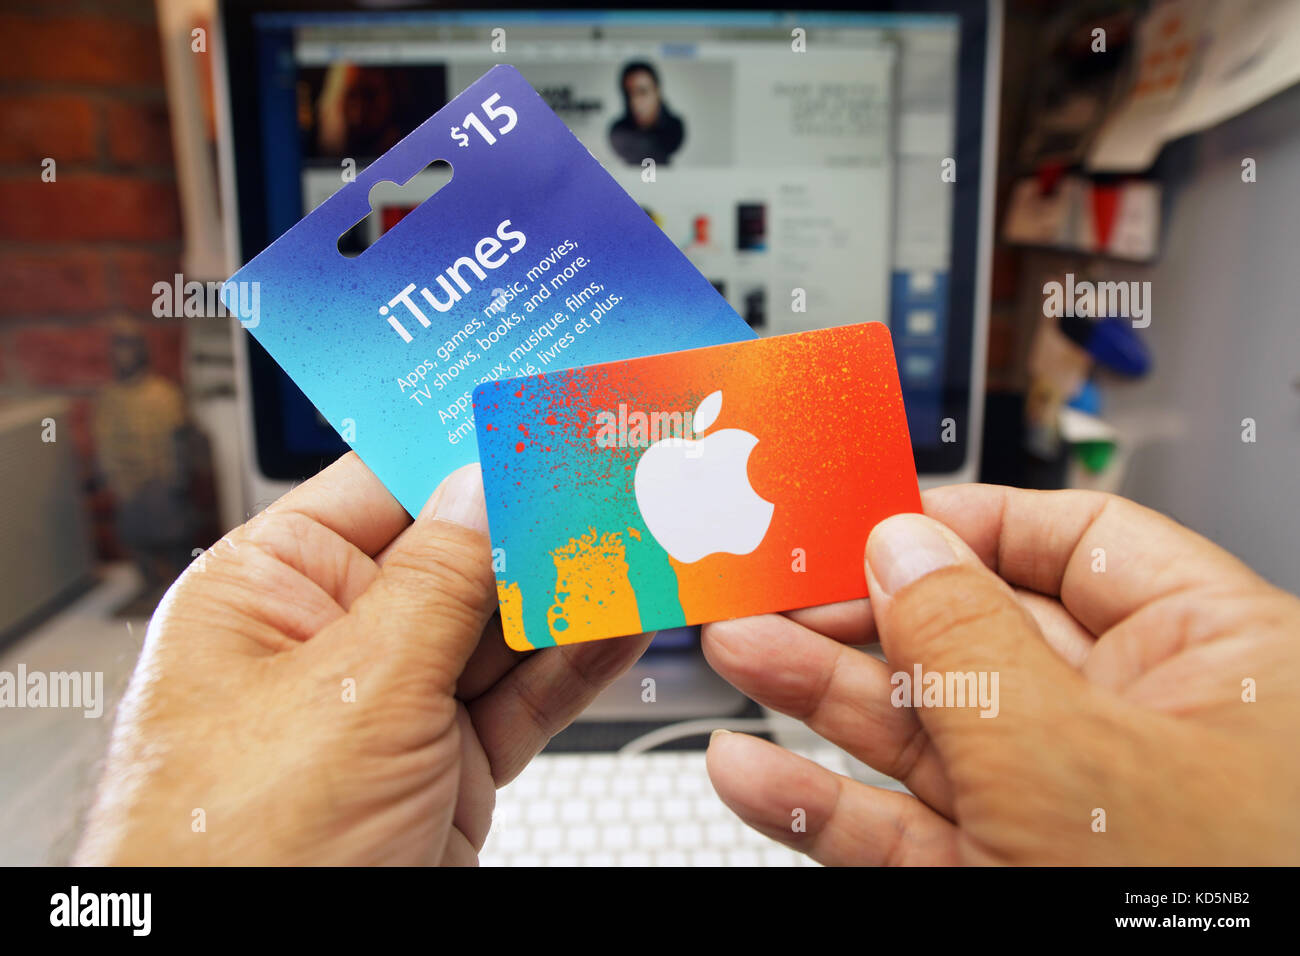 ITunes Gift Card on a White Background. Editorial Photography - Image of  cards, macro: 98220977